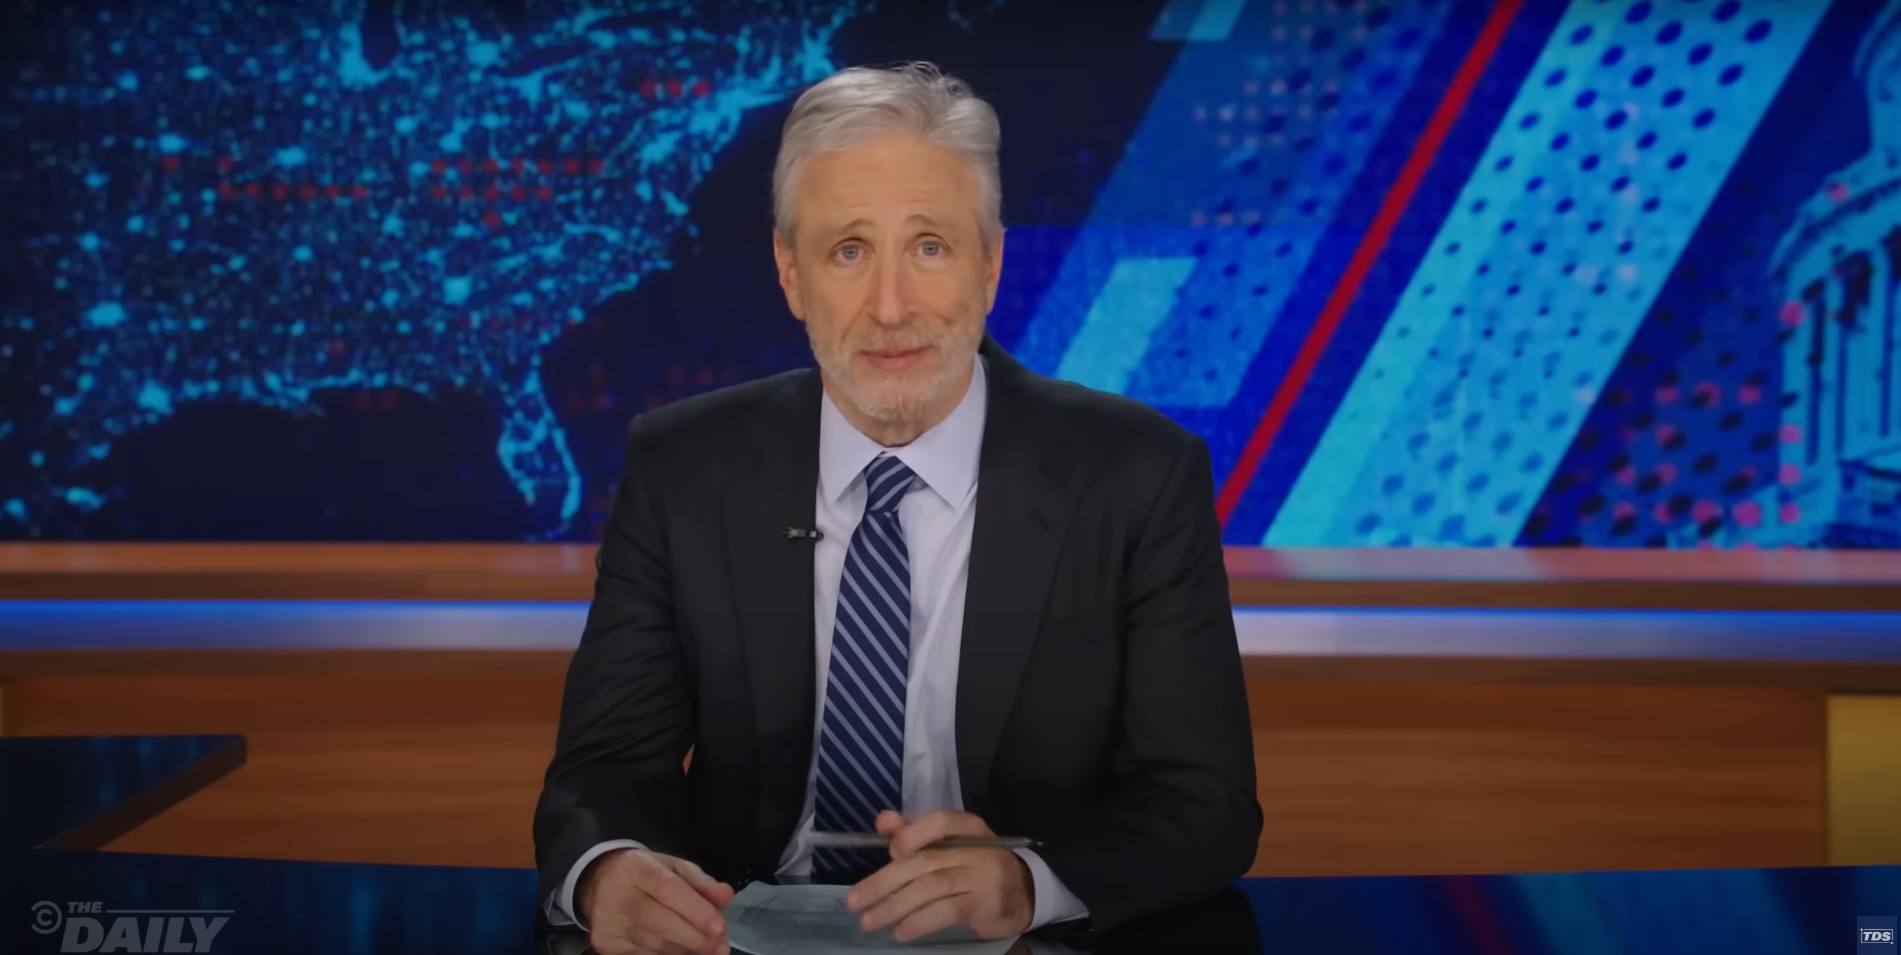 Jon Stewart critises all those who say that what Trump did in his fraud case is a “victimless crime”